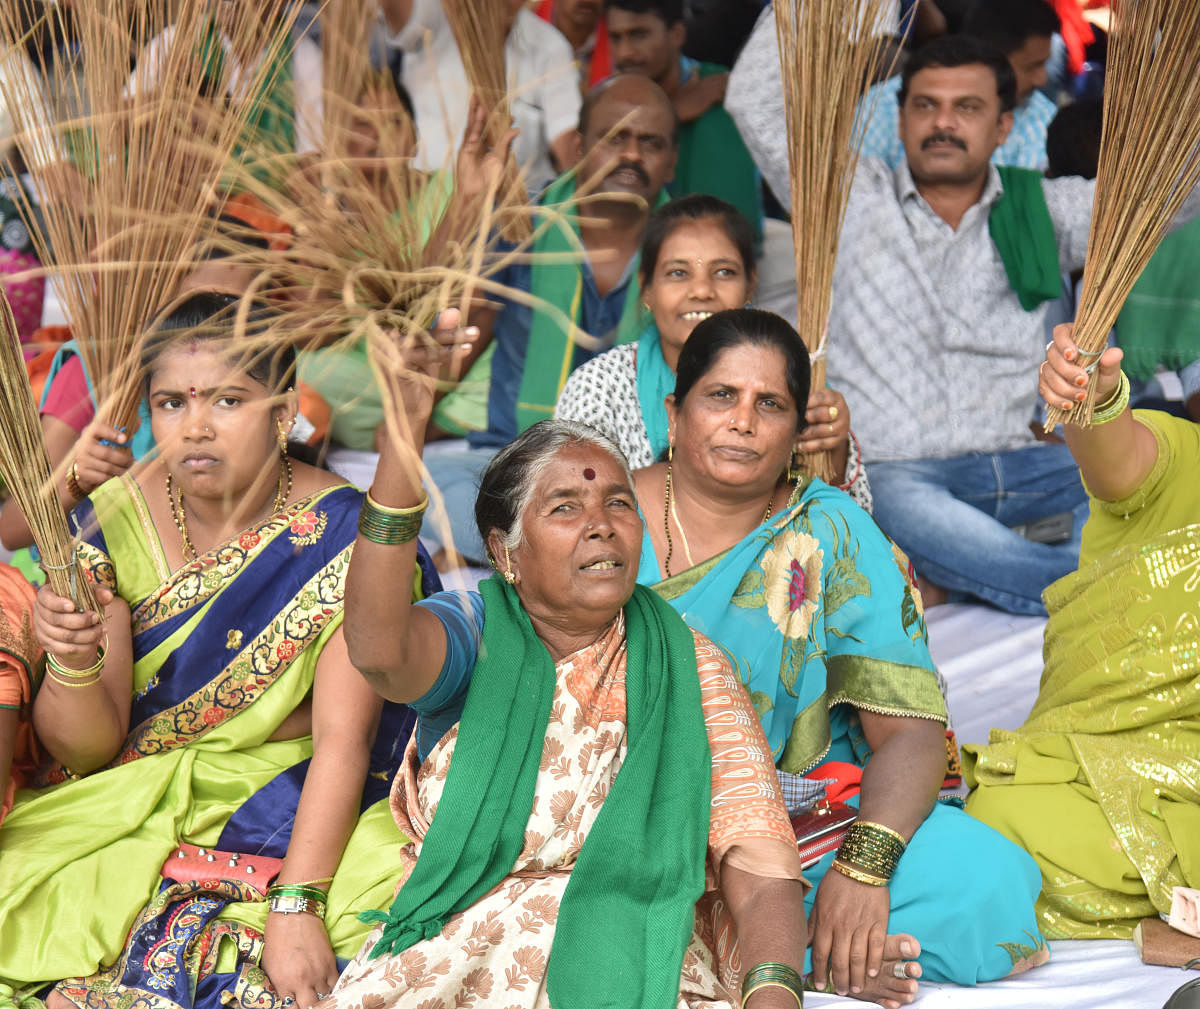 The PRR project has been mired in controversies ever since it was conceived in 2005. This file picture shows a protest by farmers set to lose their land to the project. DH PHOTO/Janardhan B K